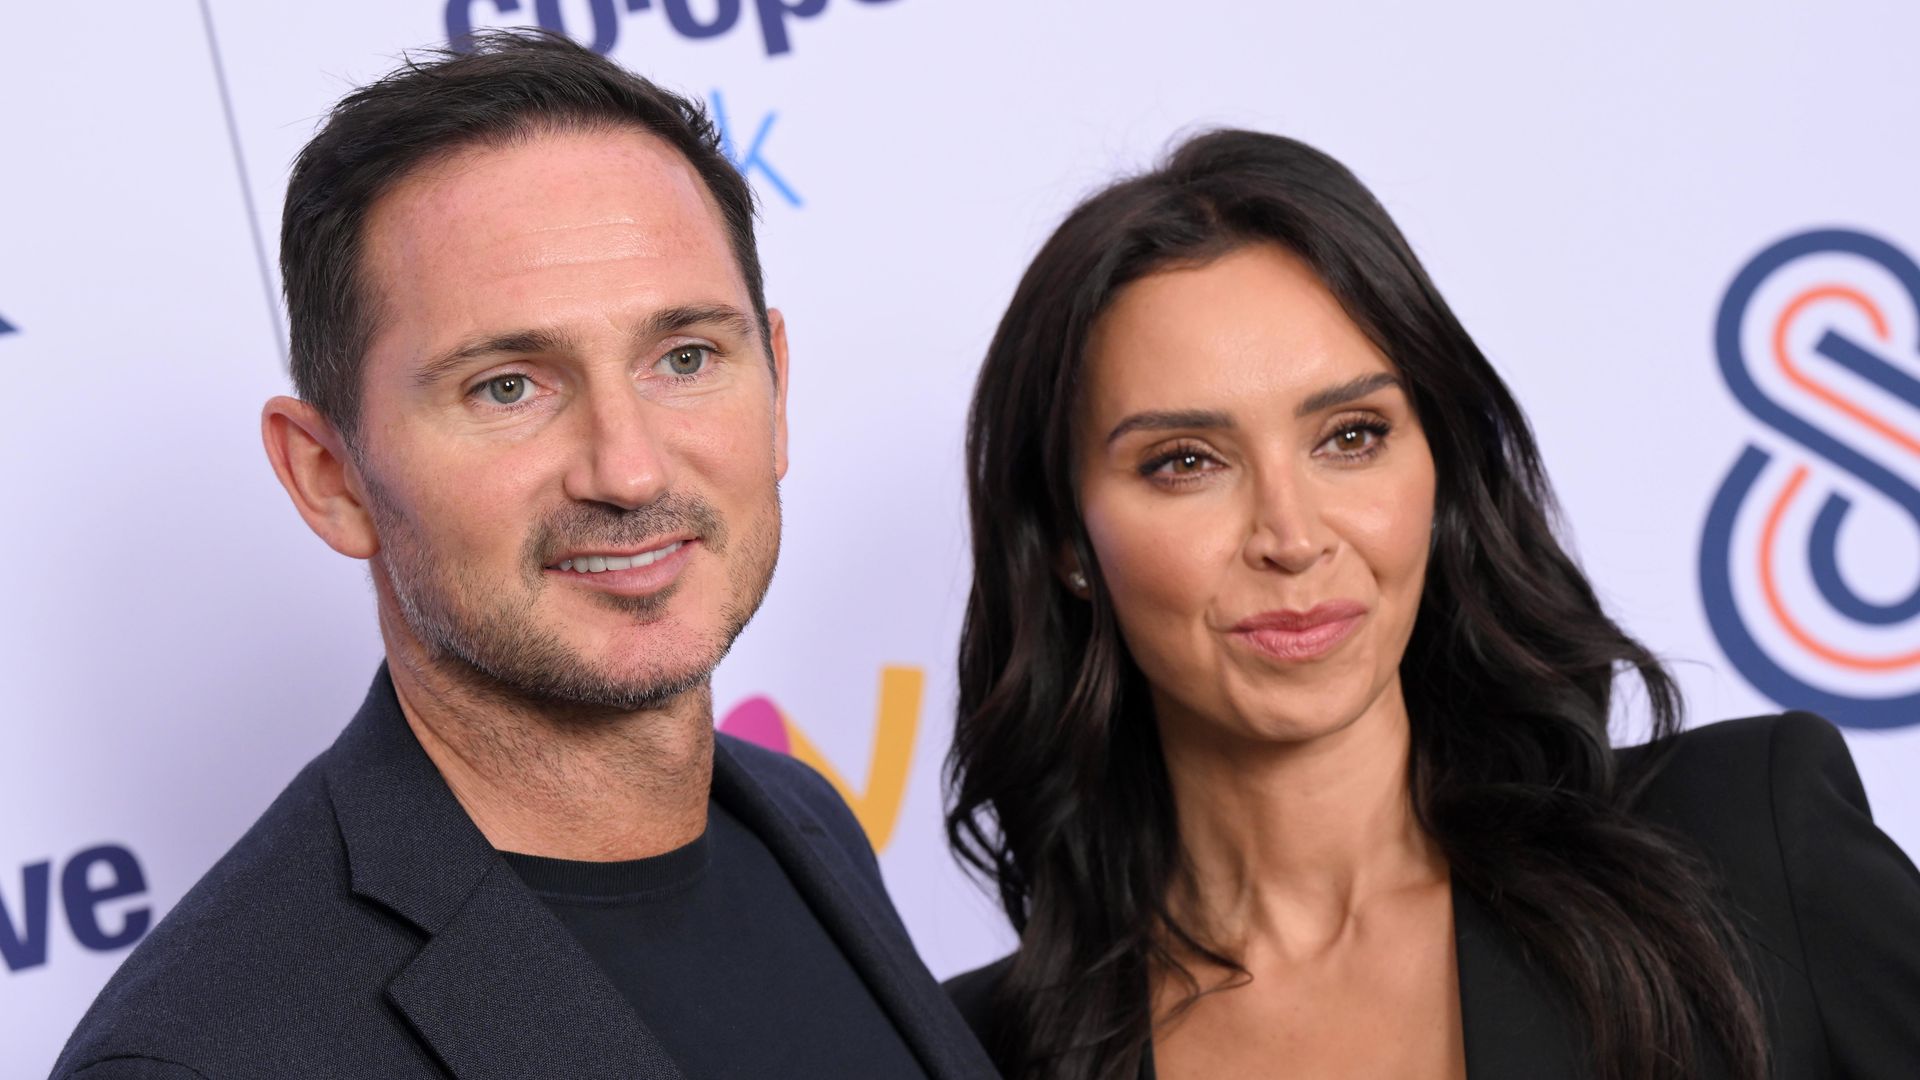 Christine Lampard looks lost for words after husband Frank's marriage confession - watch